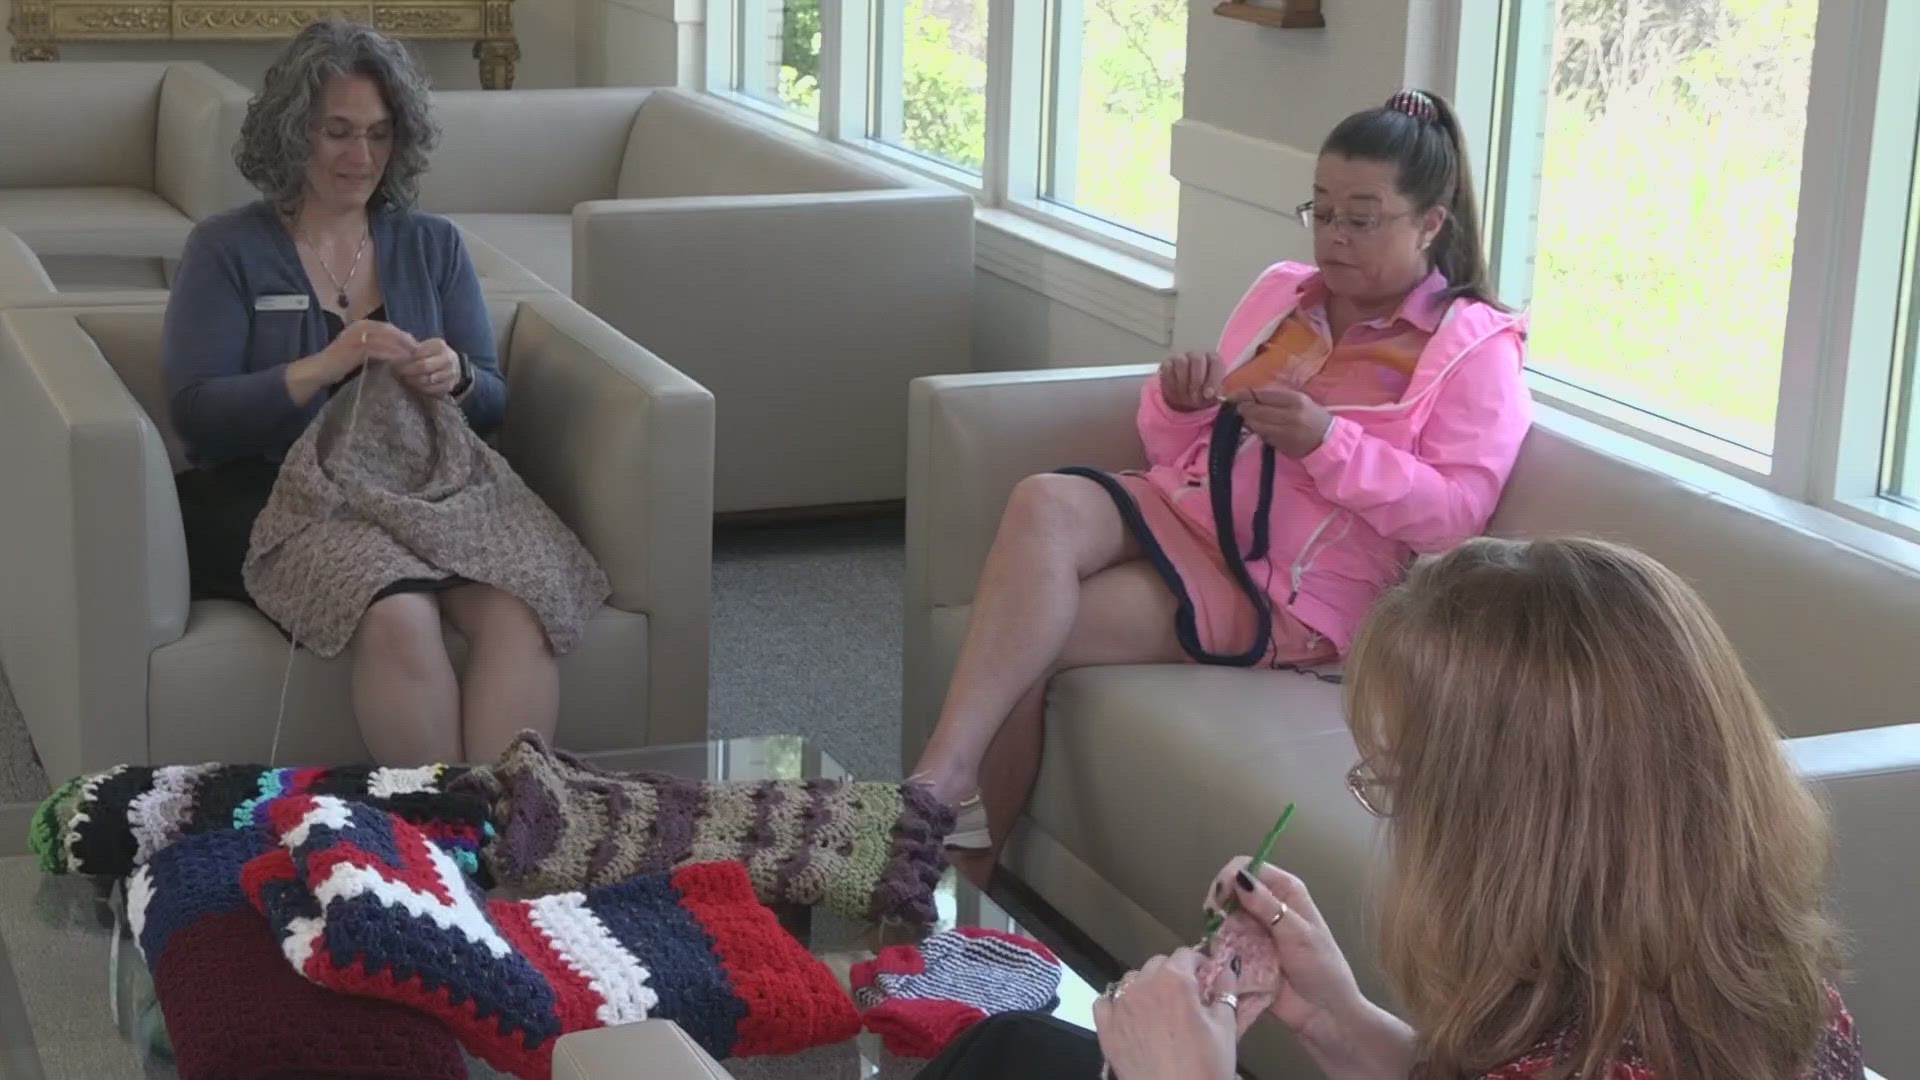 The knitters use their lunch breaks to knit and make the blankets.